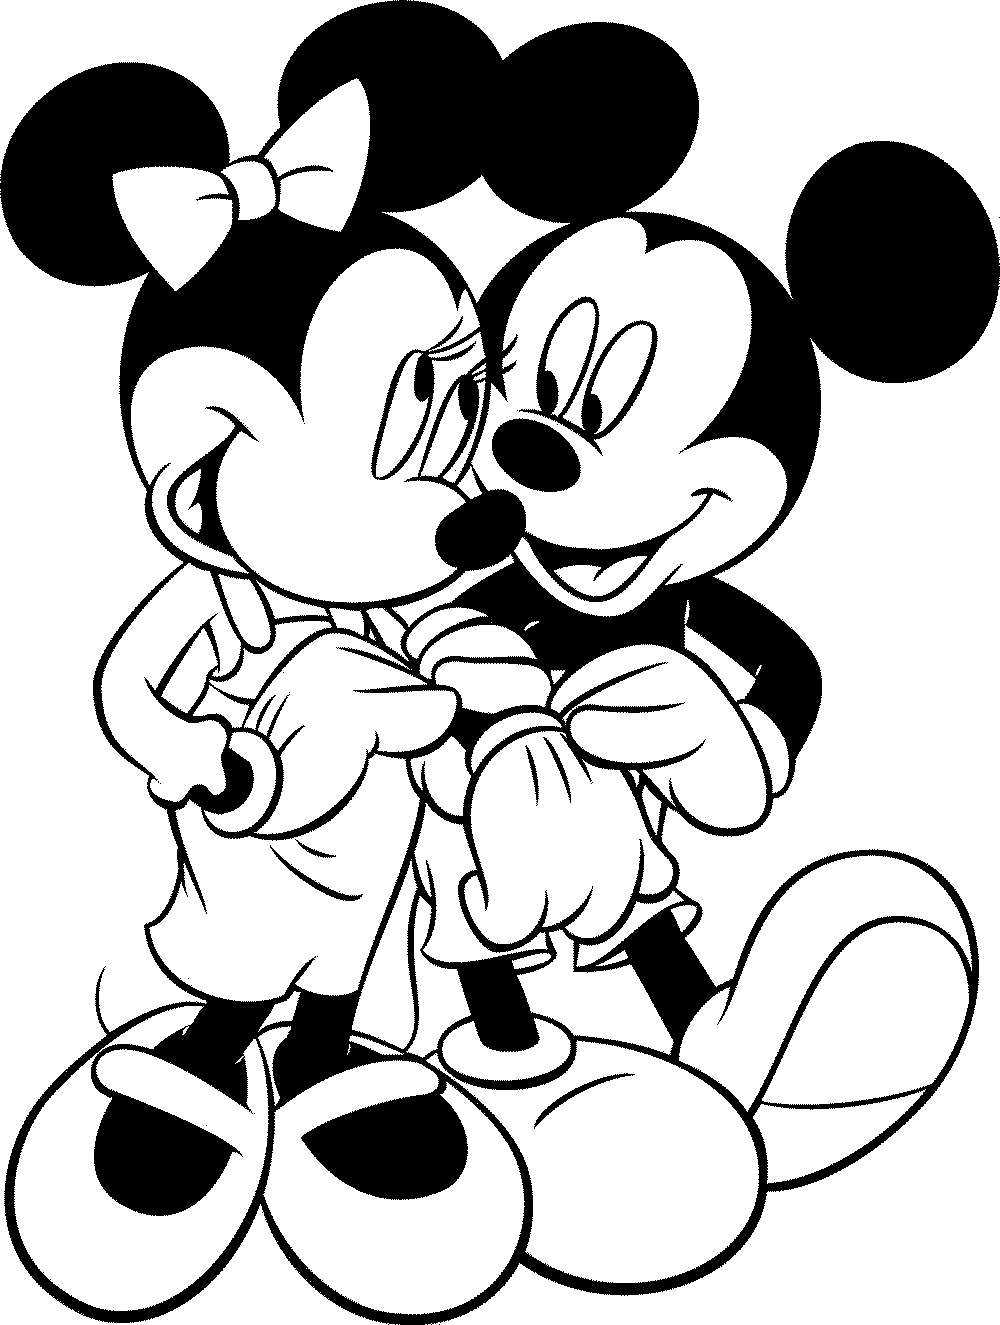 Download mickey-and-minnie-mouse-coloring-pages | | BestAppsForKids.com